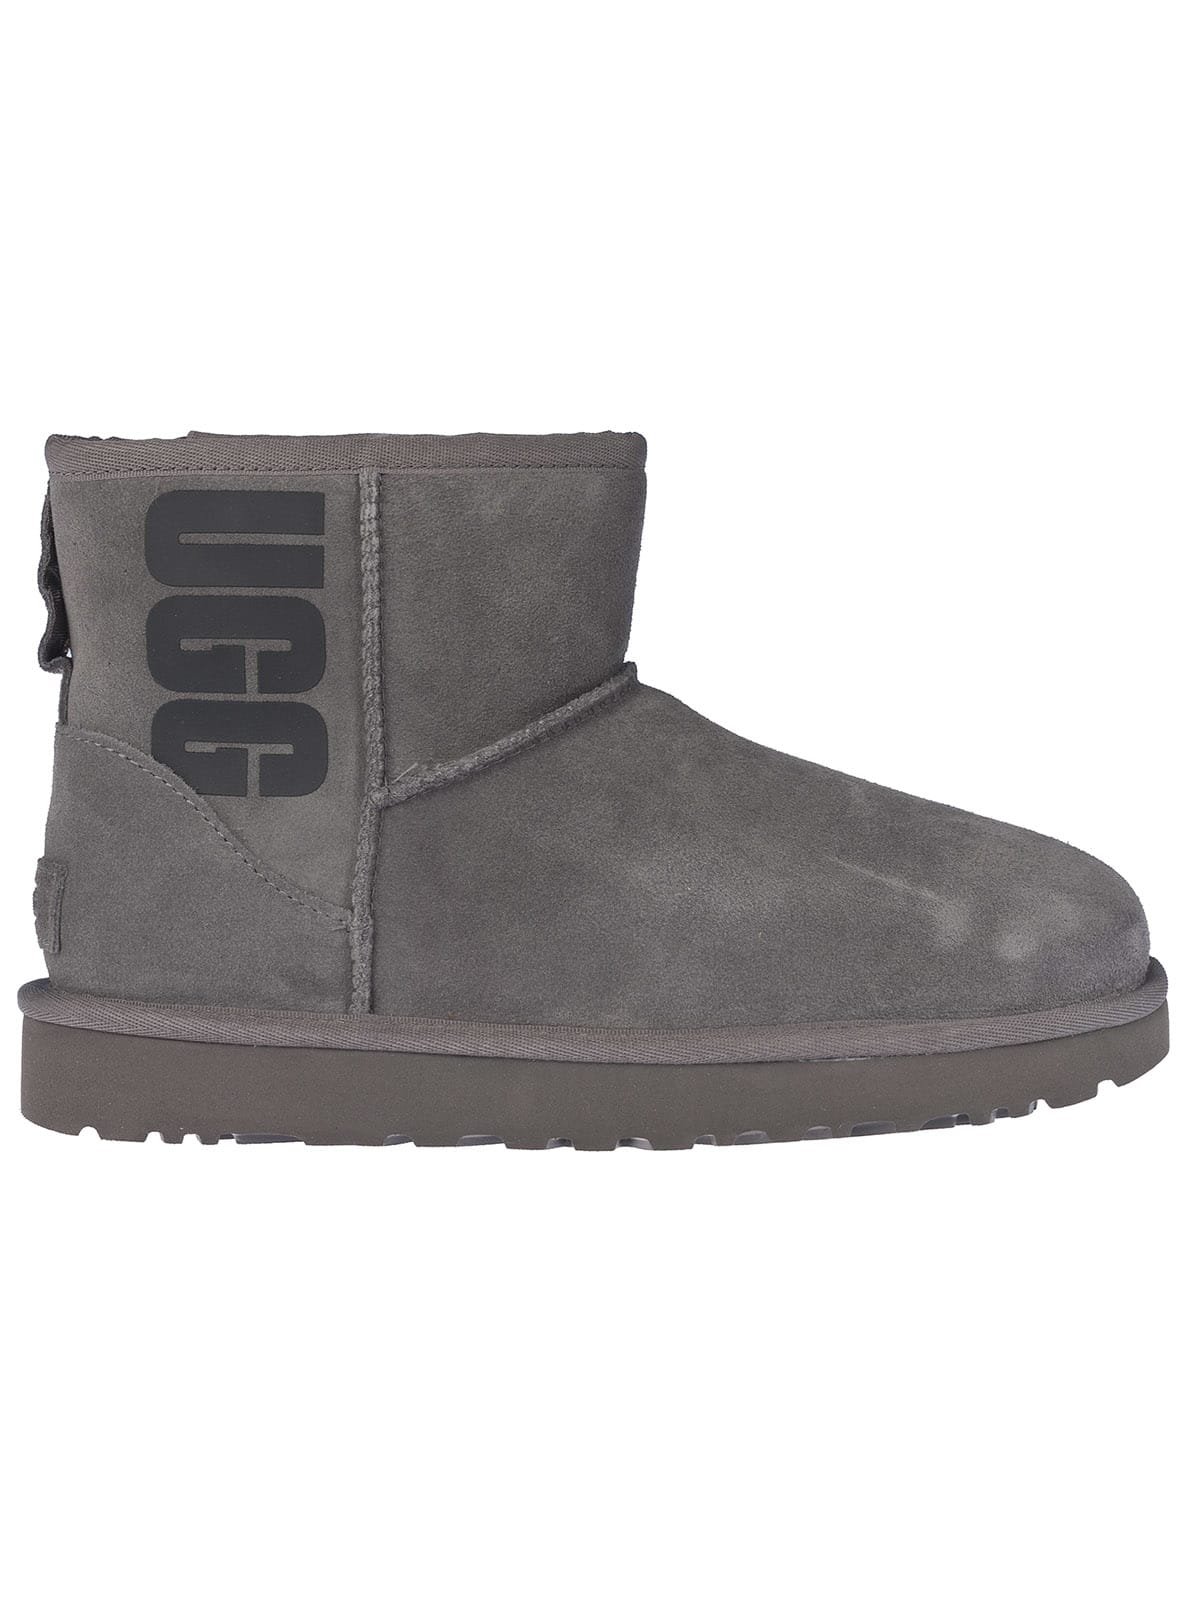 Buy UGG Classic Mini Logo Boots online, shop UGG shoes with free shipping